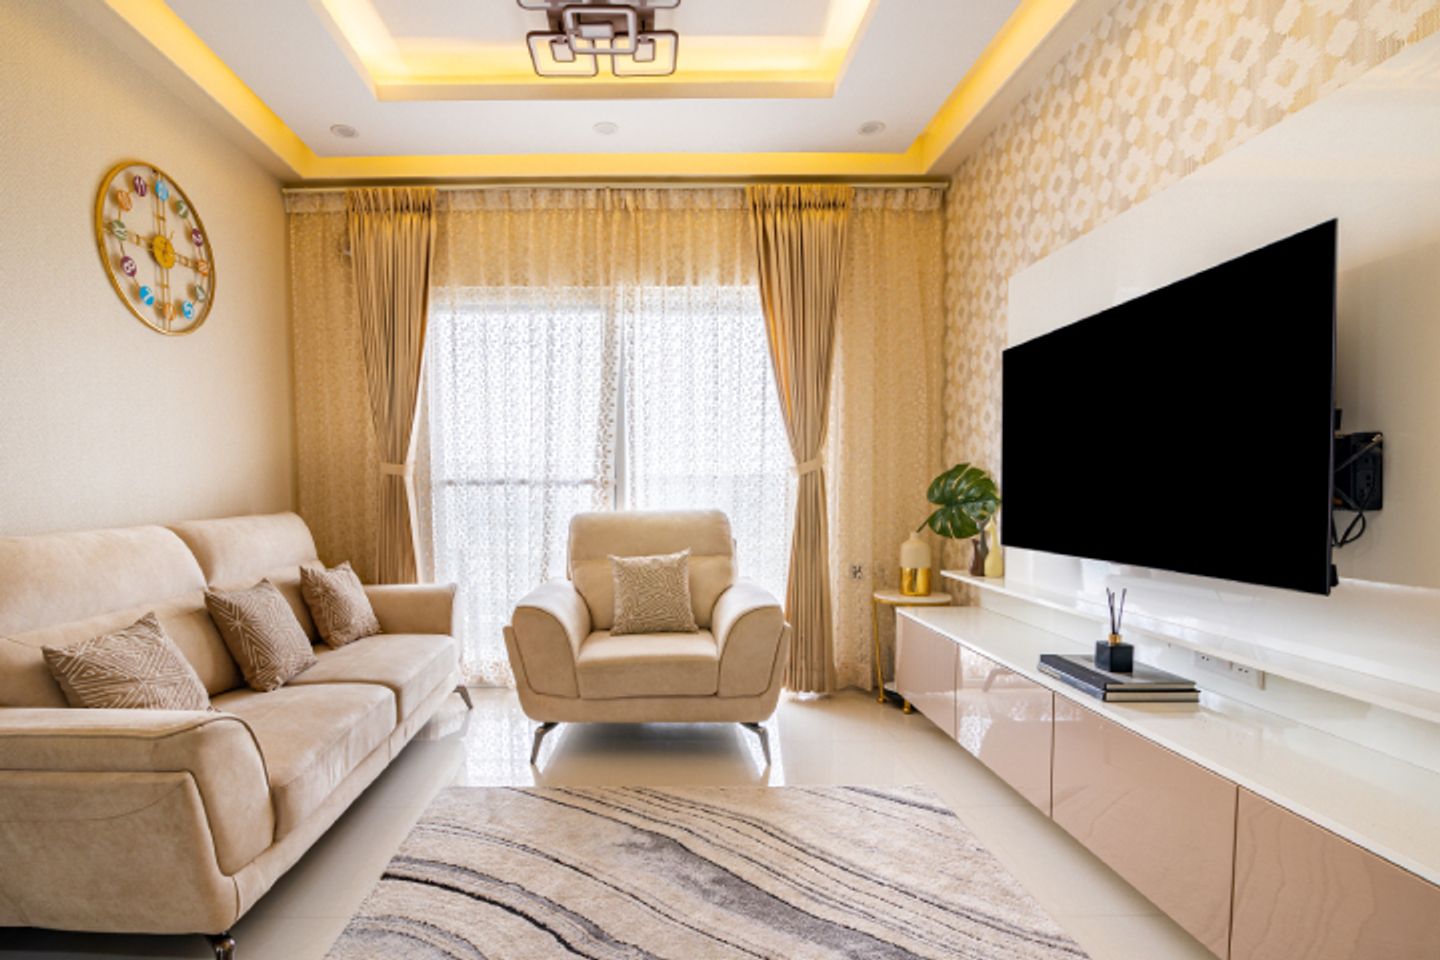 Contemporary Living Room Design With A Wall-Mounted TV Unit